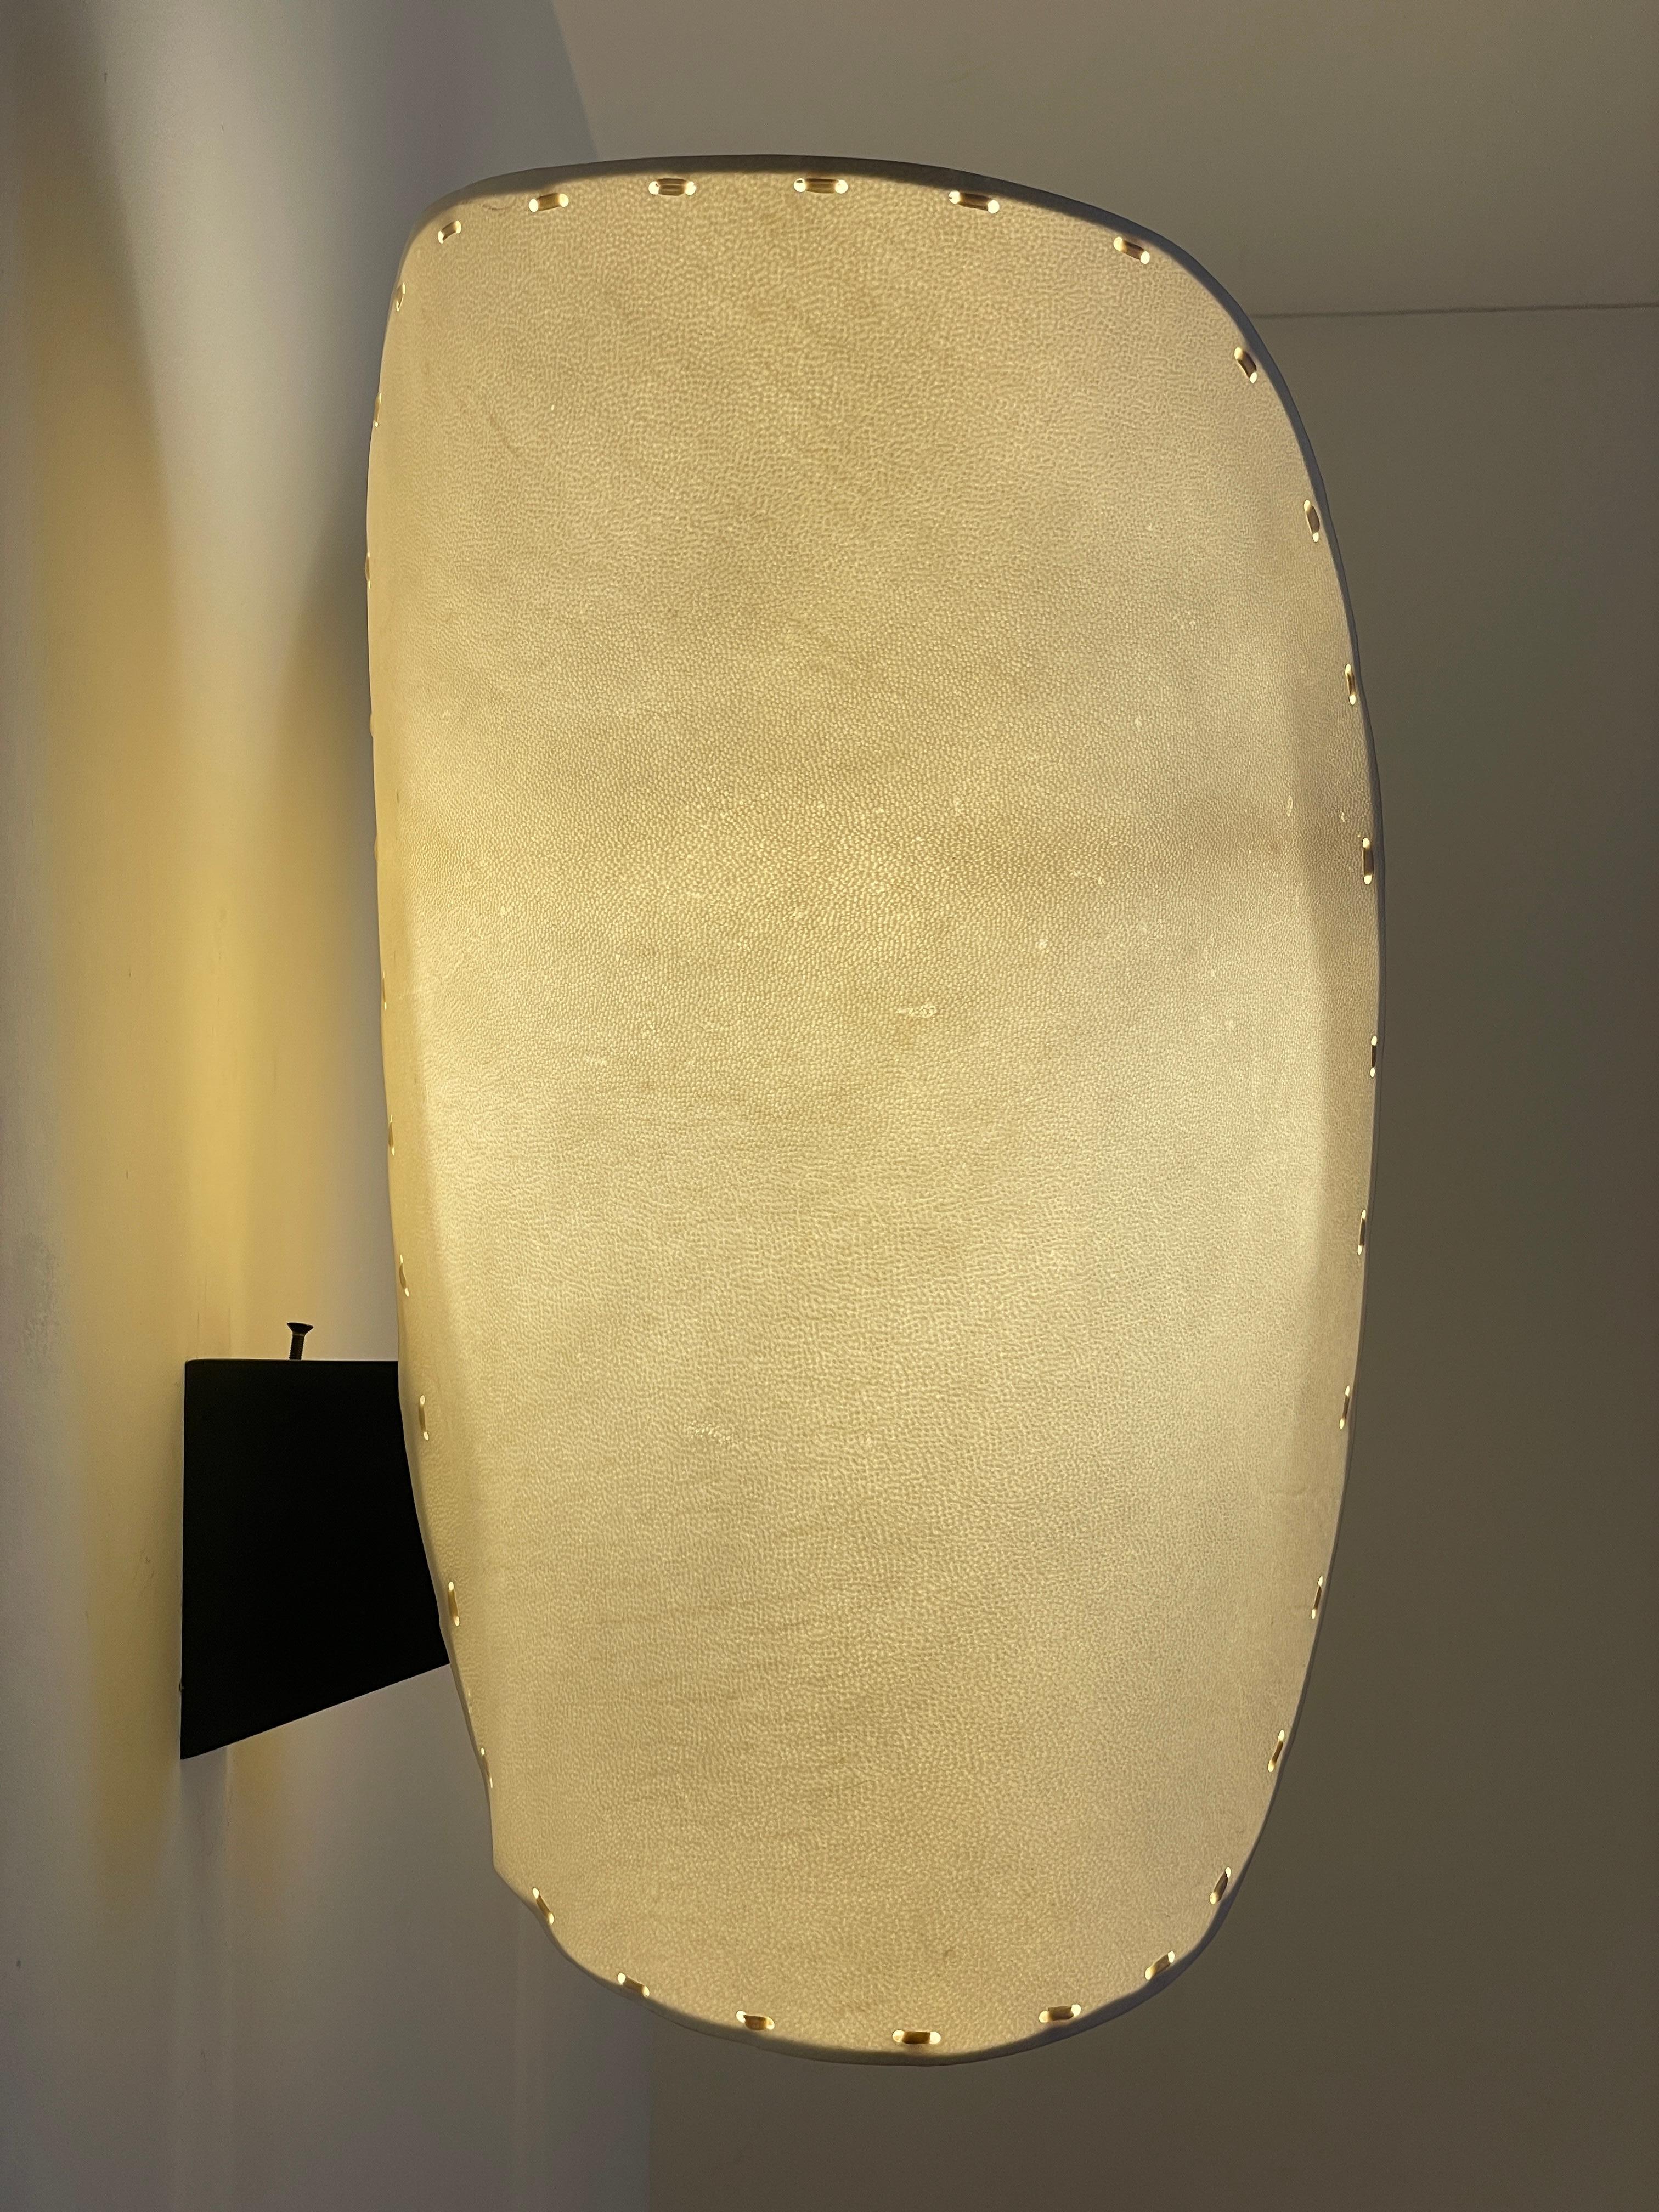 Mauro Fabbro “Gstaad” Wall Lamps Sconce  Alexandre Biaggi  Botega Volta. Signed  For Sale 1